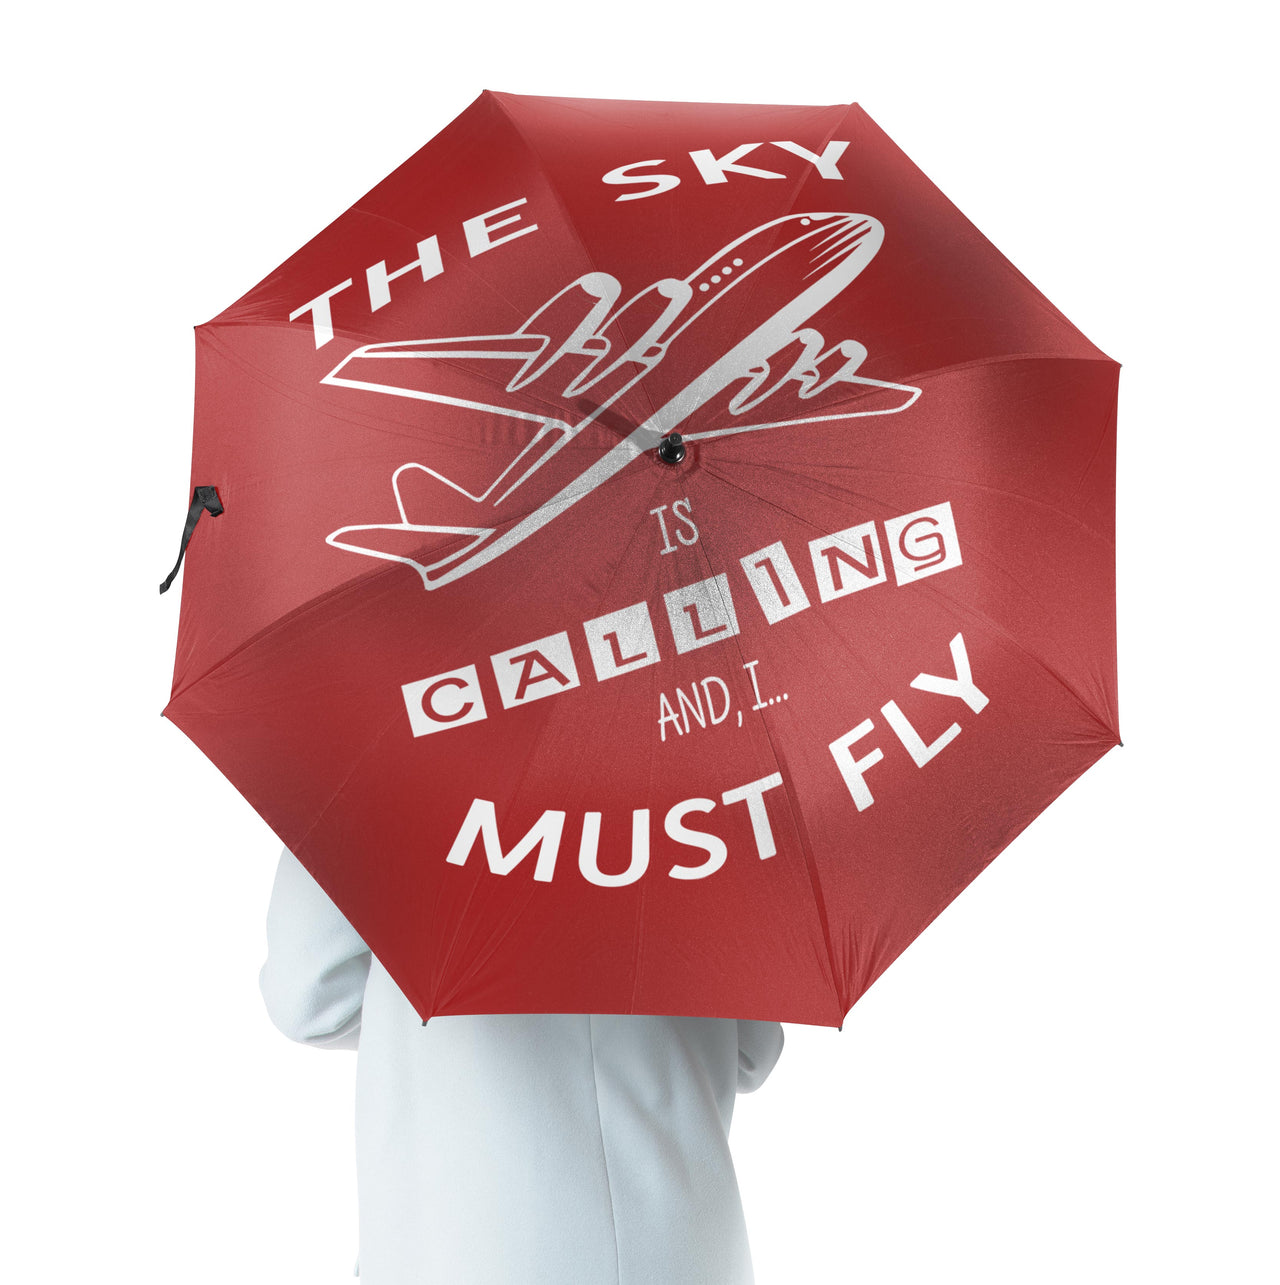 The Sky is Calling and I Must Fly Designed Umbrella